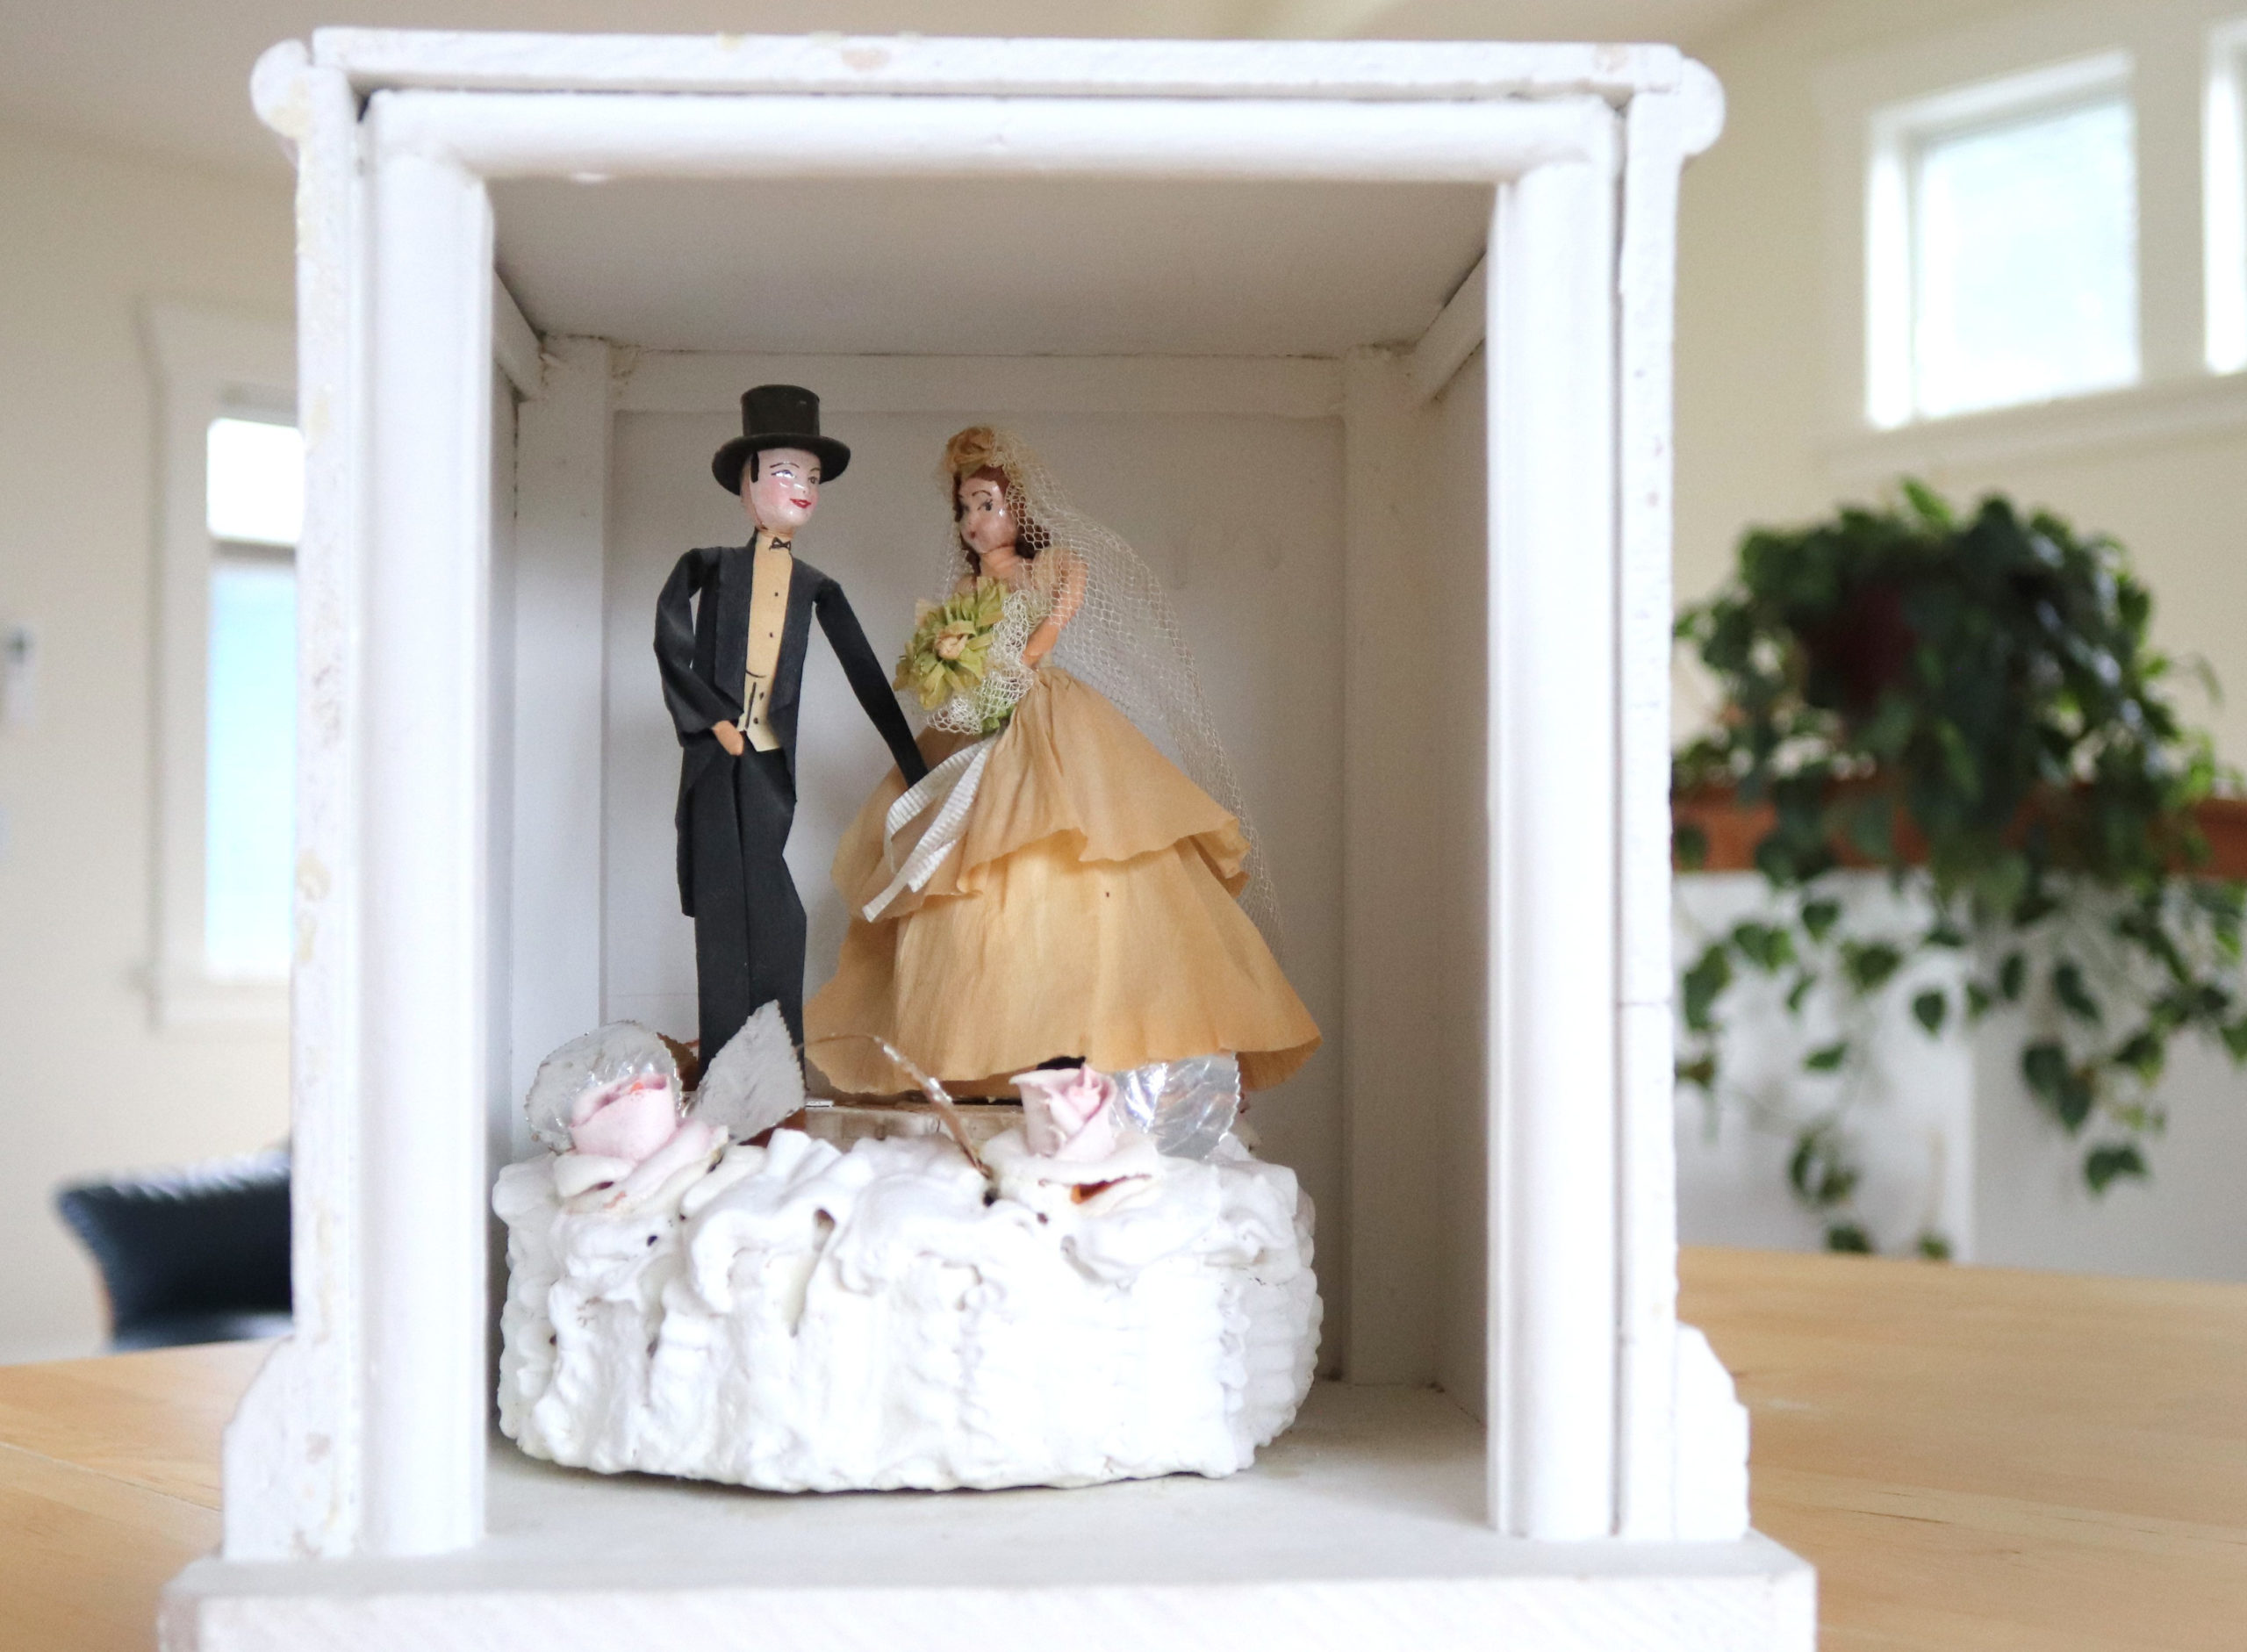 The top tier of the Nishimotos' wedding cake inside a display box. On top of the cake are a set of wooden bride and groom figures.